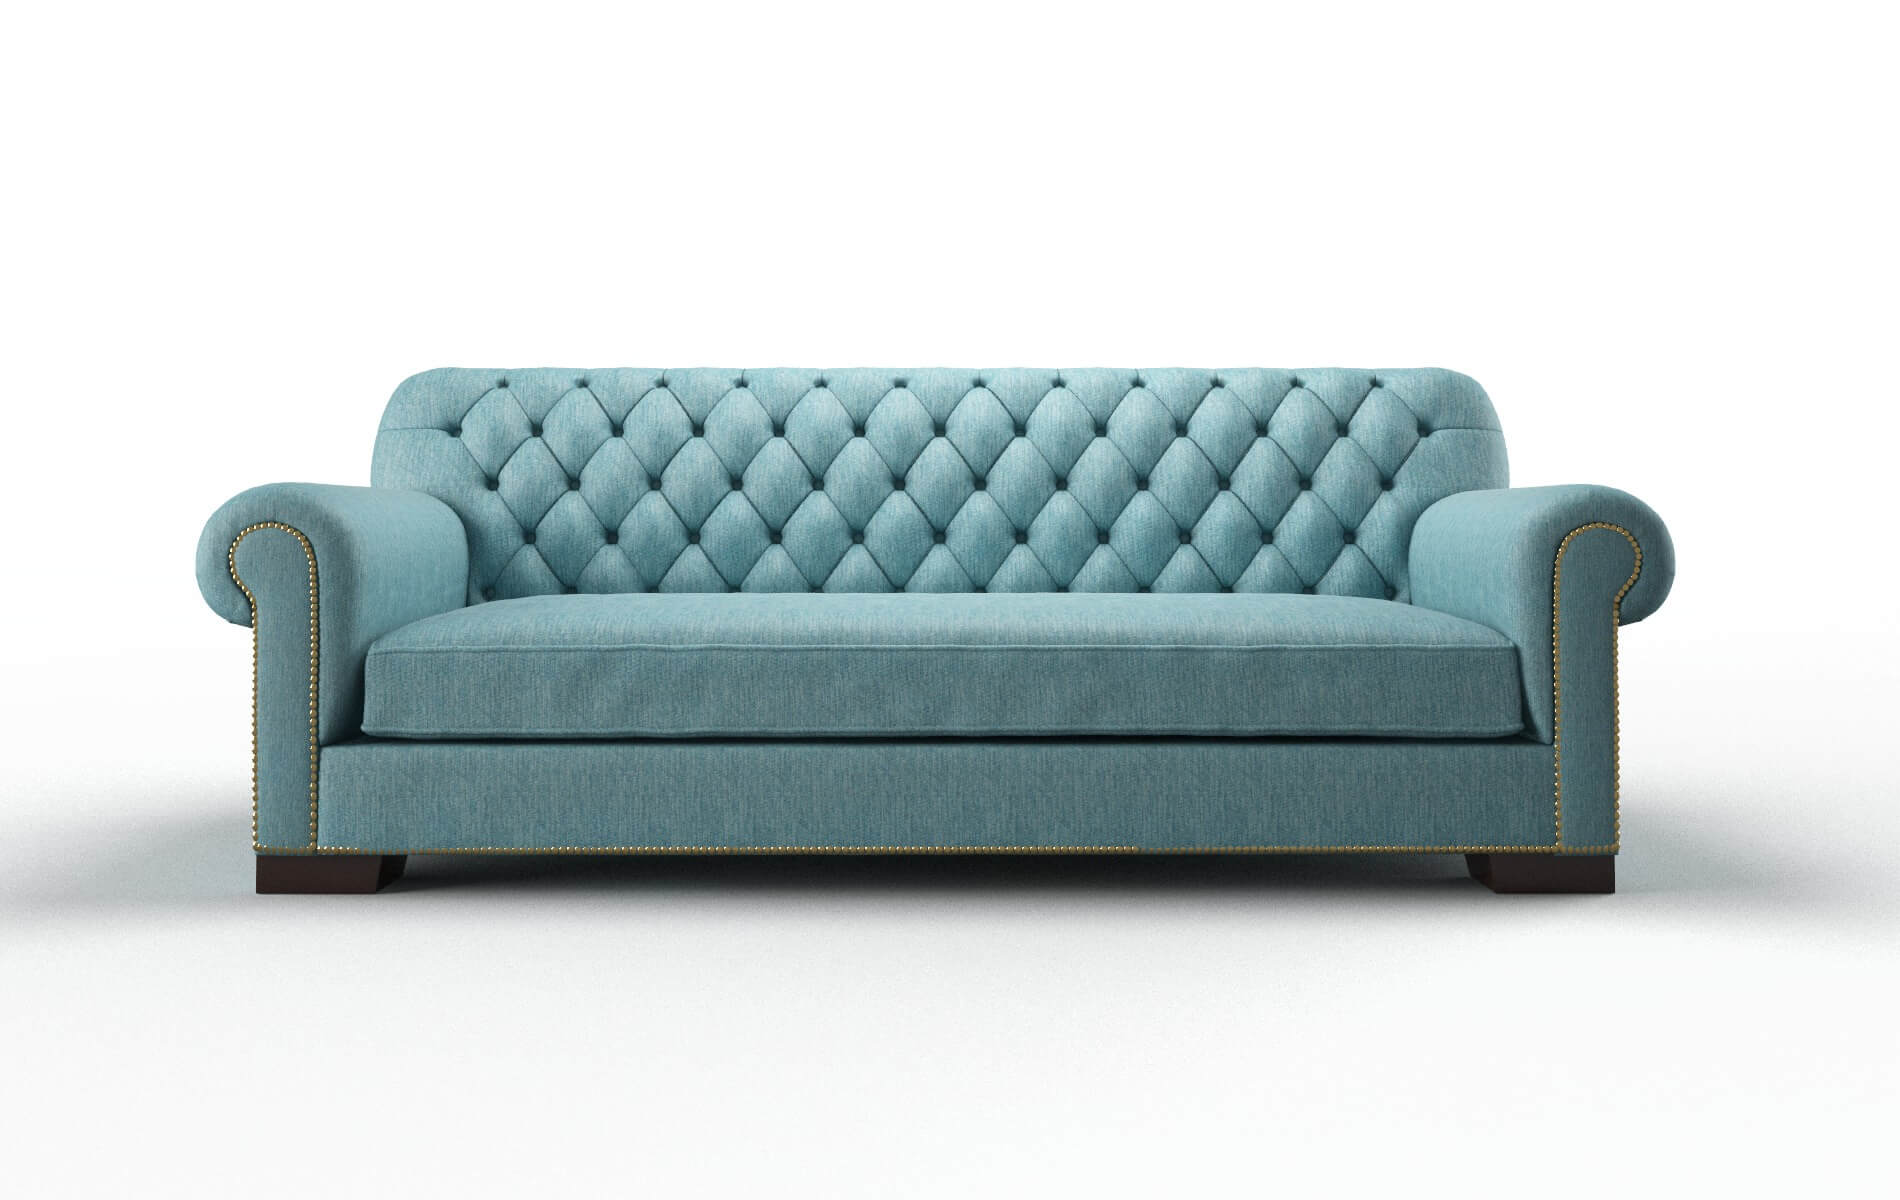 Chester Cosmo Turquoise chair espresso legs